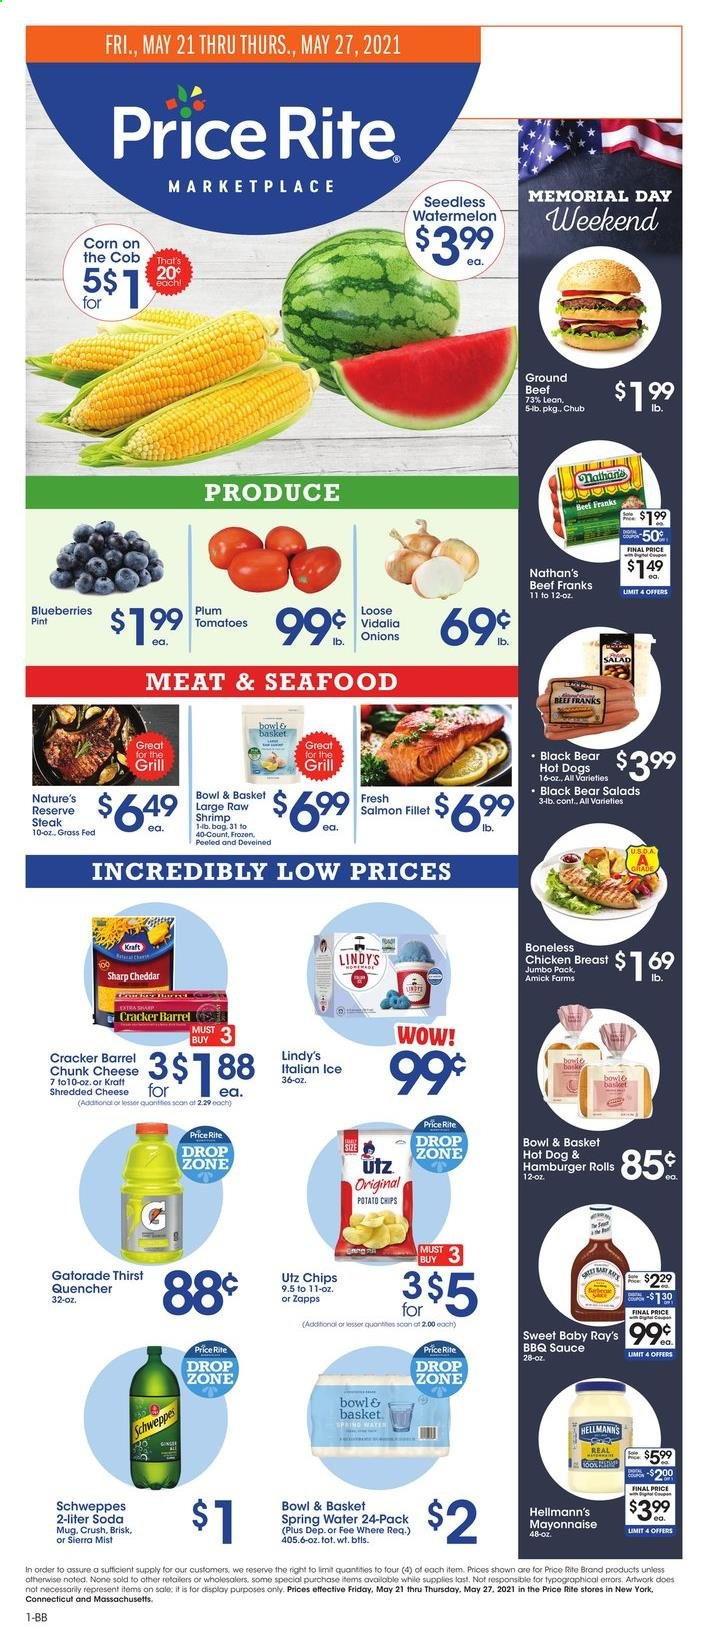 thumbnail - Price Rite Flyer - 05/21/2021 - 05/27/2021 - Sales products - burger buns, Bowl & Basket, corn, tomatoes, onion, salad, blueberries, watermelon, salmon, salmon fillet, seafood, shrimps, hot dog, hamburger, sauce, shredded cheese, chunk cheese, mayonnaise, Hellmann’s, crackers, potato chips, chips, BBQ sauce, Schweppes, soda, Sierra Mist, Gatorade, spring water, chicken breasts, steak. Page 1.